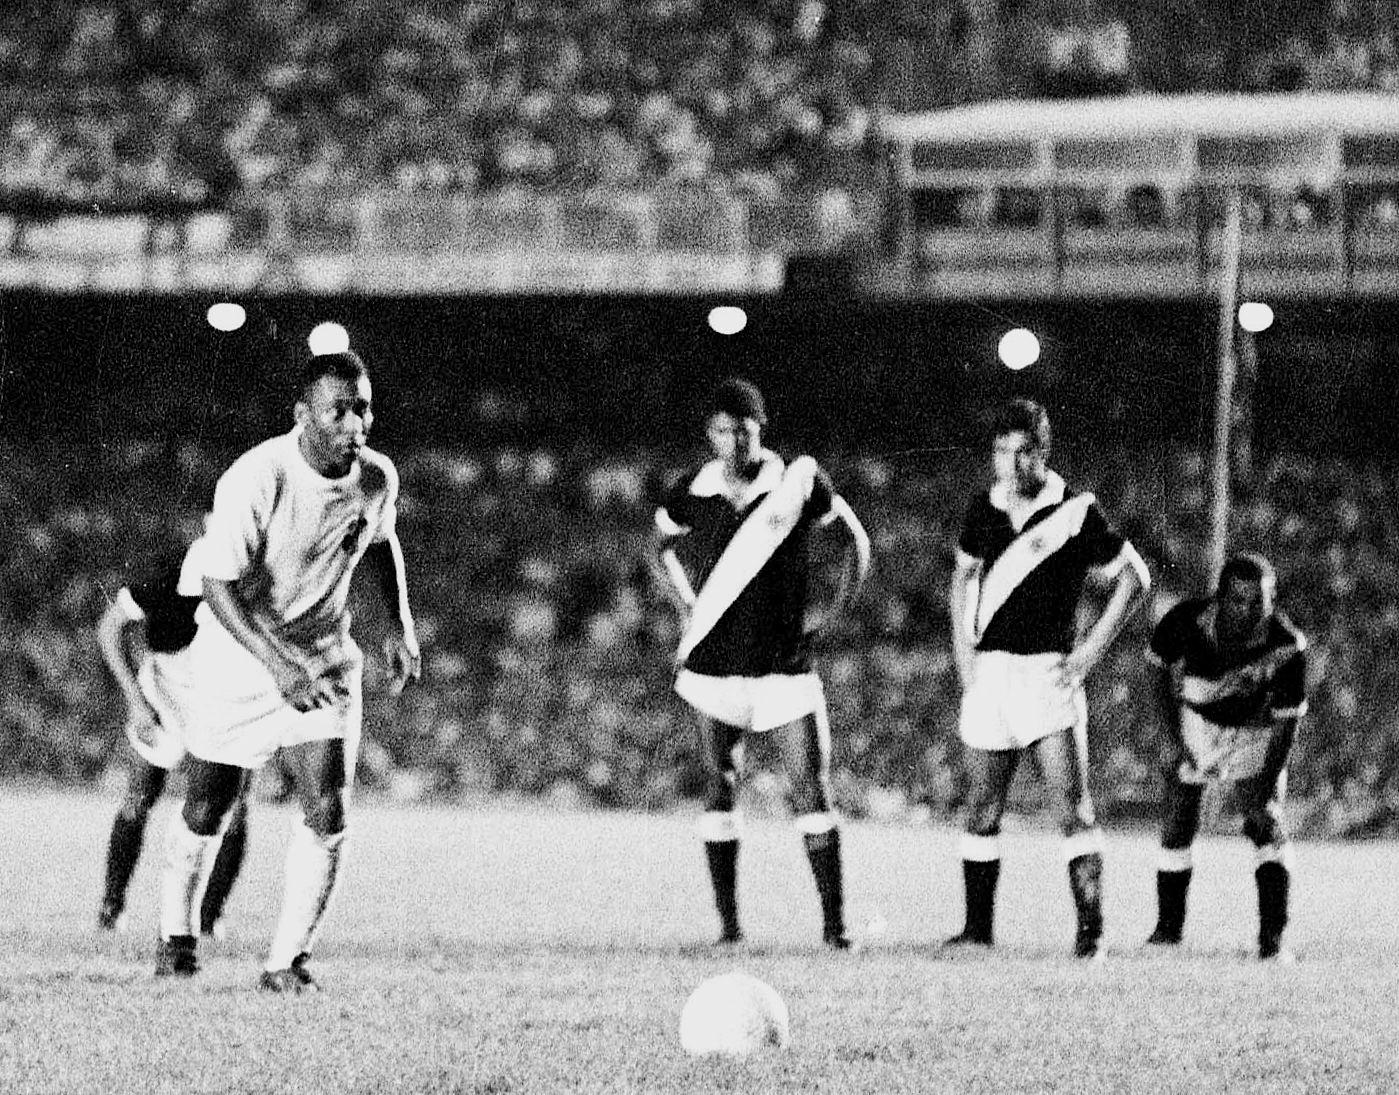 Picture taken on November 19, 1969 shows Santos football player Pele preparing to score his 1000th goal from the penalty spot against Vasco de Gama at the Maracana stadium in Rio de Janeiro.,Image: 68162824, License: Rights-managed, Restrictions: Brazil OUT / RESTRICTED TO EDITORIAL USE - MANDATORY CREDIT "AFP PHOTO/DOMICIO PINHEIRO" - NO MARKETING NO ADVERTISING CAMPAIGNS - INTERNET OUT- DISTRIBUTED AS A SERVICE TO CLIENTS, ***
HANDOUT image or SOCIAL MEDIA IMAGE or FILMSTILL for EDITORIAL USE ONLY! * Please note: Fees charged by Profimedia are for the Profimedia's services only, and do not, nor are they intended to, convey to the user any ownership of Copyright or License in the material. Profimedia does not claim any ownership including but not limited to Copyright or License in the attached material. By publishing this material you (the user) expressly agree to indemnify and to hold Profimedia and its directors, shareholders and employees harmless from any loss, claims, damages, demands, expenses (including legal fees), or any causes of action or allegation against Profimedia arising out of or connected in any way with publication of the material. Profimedia does not claim any copyright or license in the attached materials. Any downloading fees charged by Profimedia are for Profimedia's services only. * Handling Fee Only 
***, Model Release: no, Credit line: DOMICIO PINHEIRO / AFP / Profimedia